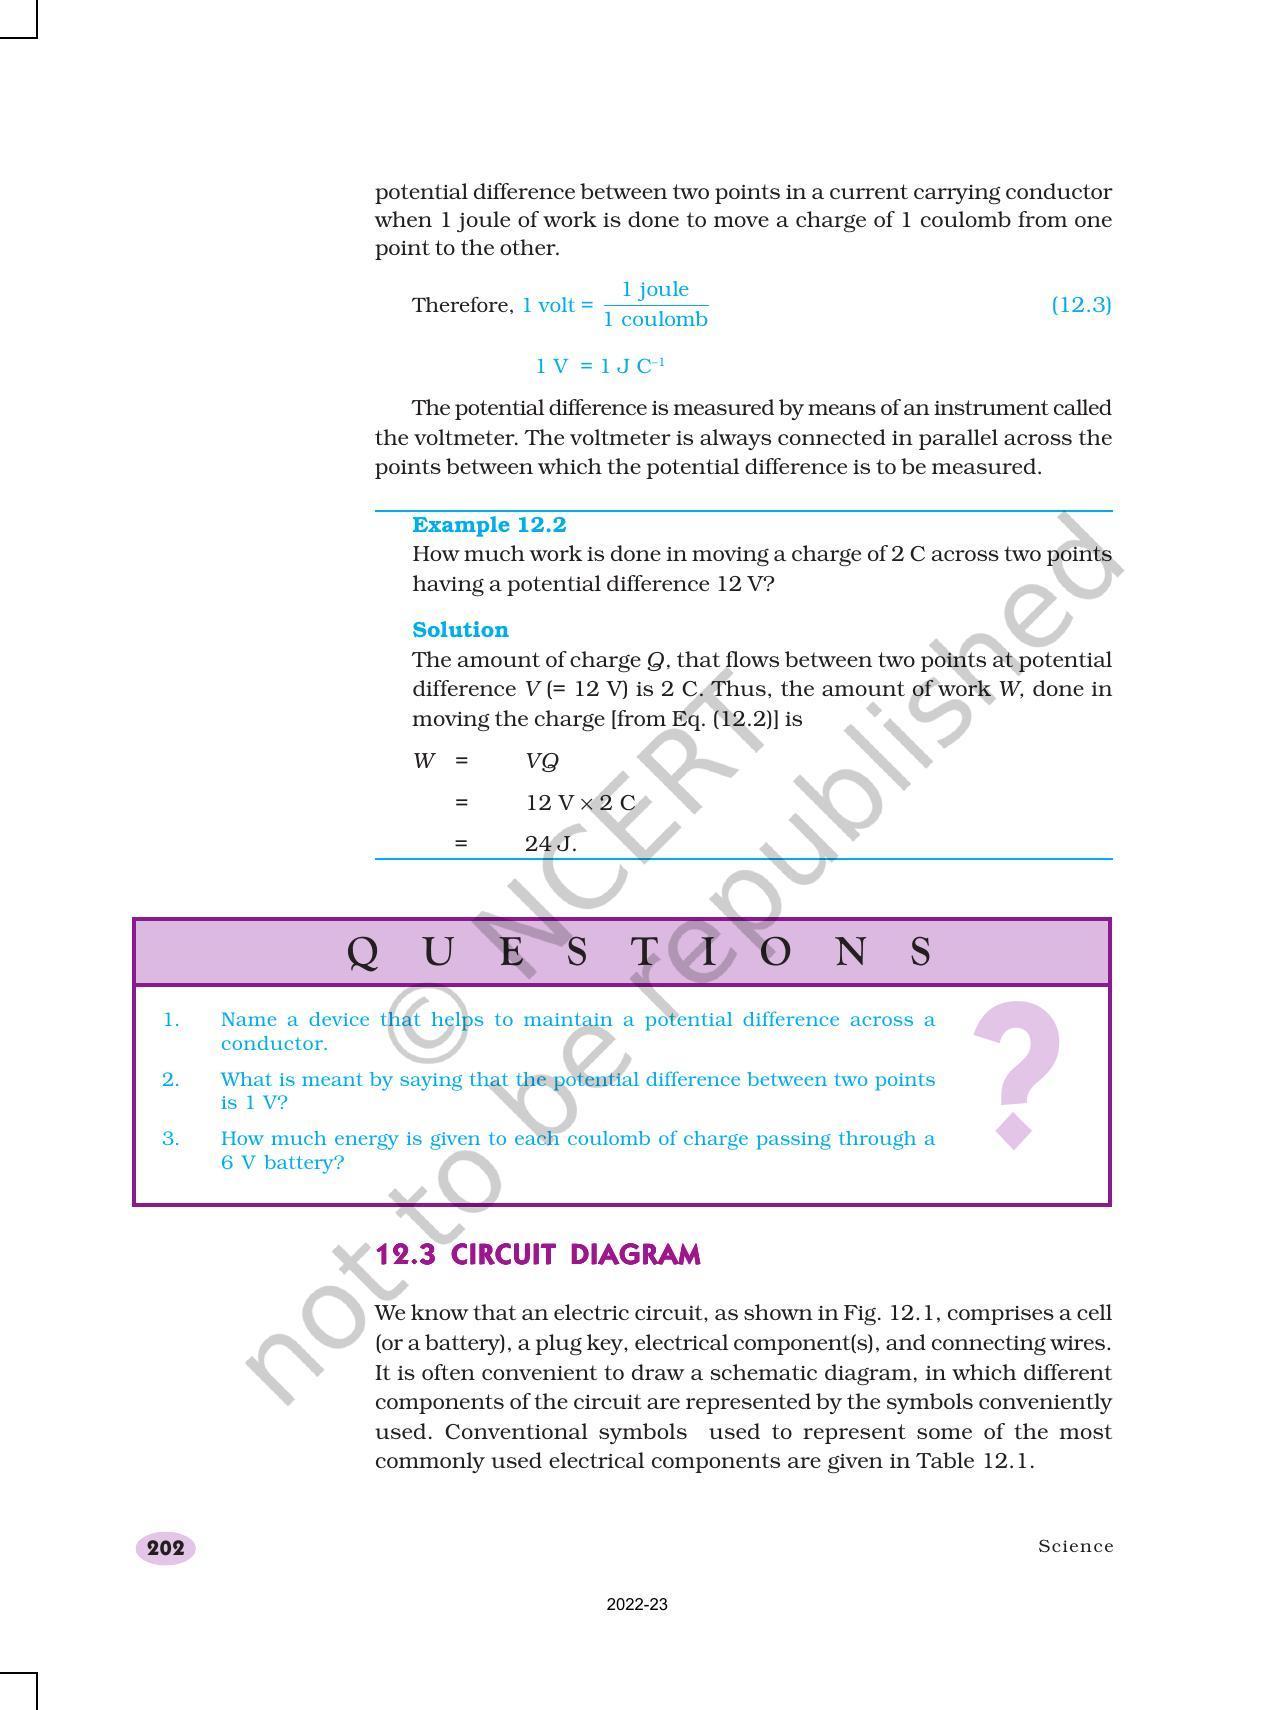 NCERT Book for Class 10 Science Chapter 12 Electricity - Page 4